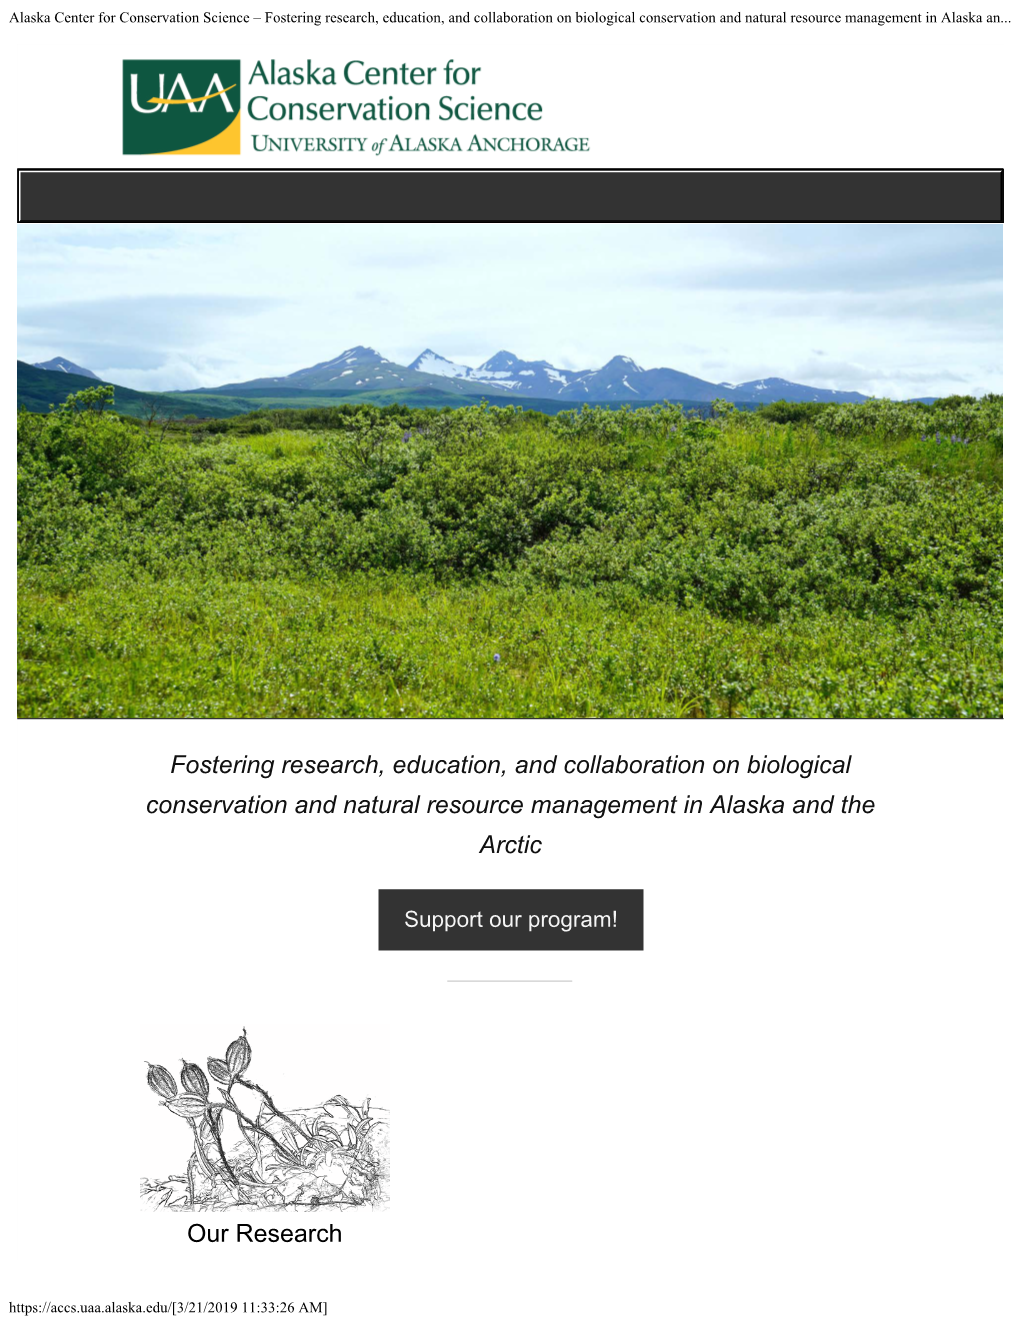 Alaska Center for Conservation Science – Fostering Research, Education, and Collaboration on Biological Conservation and Natural Resource Management in Alaska An